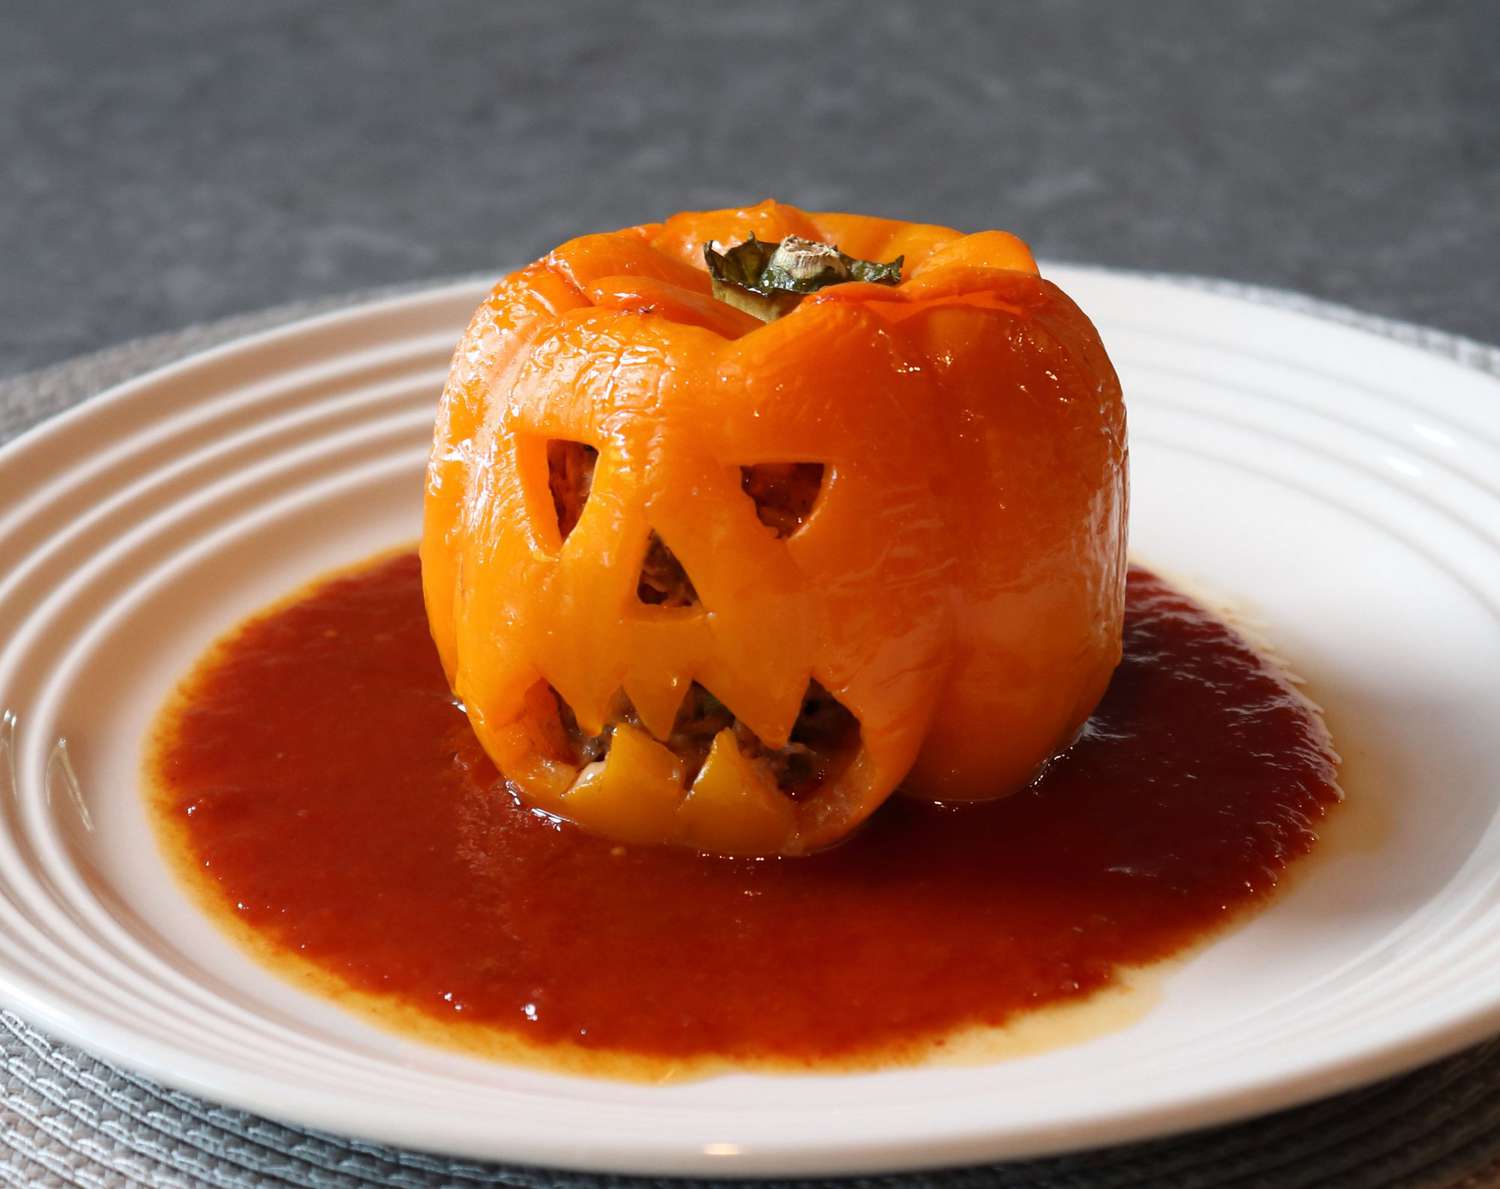 an orange bell pepper cut to look like a jack o' lantern face in a pool of tomato sauce on a white plate